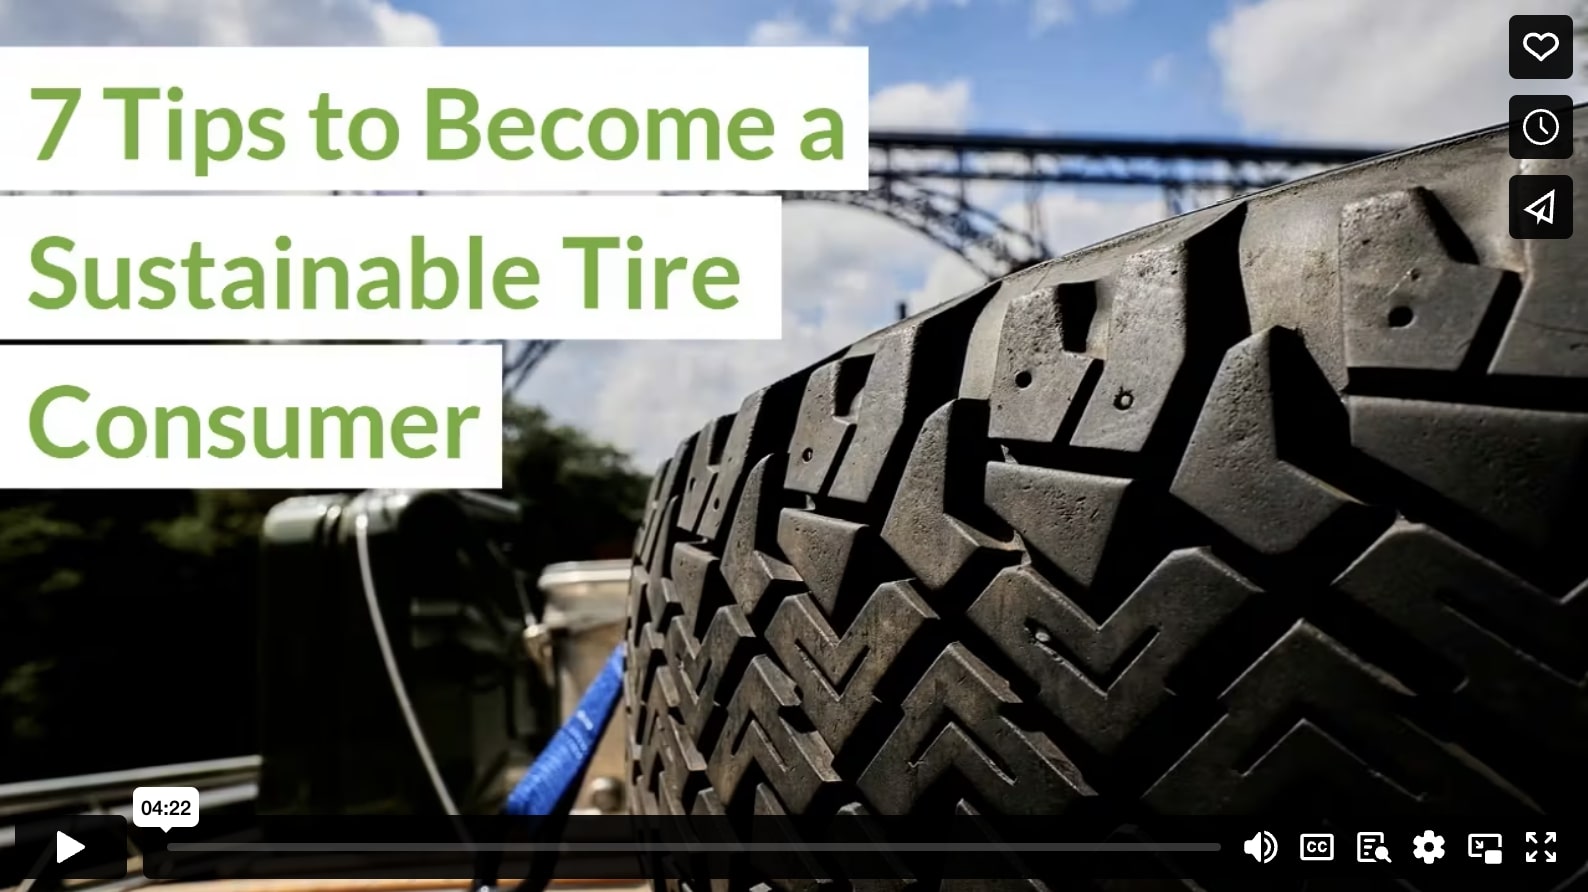 7 Tips to Become a Sustainable Tire Consumer